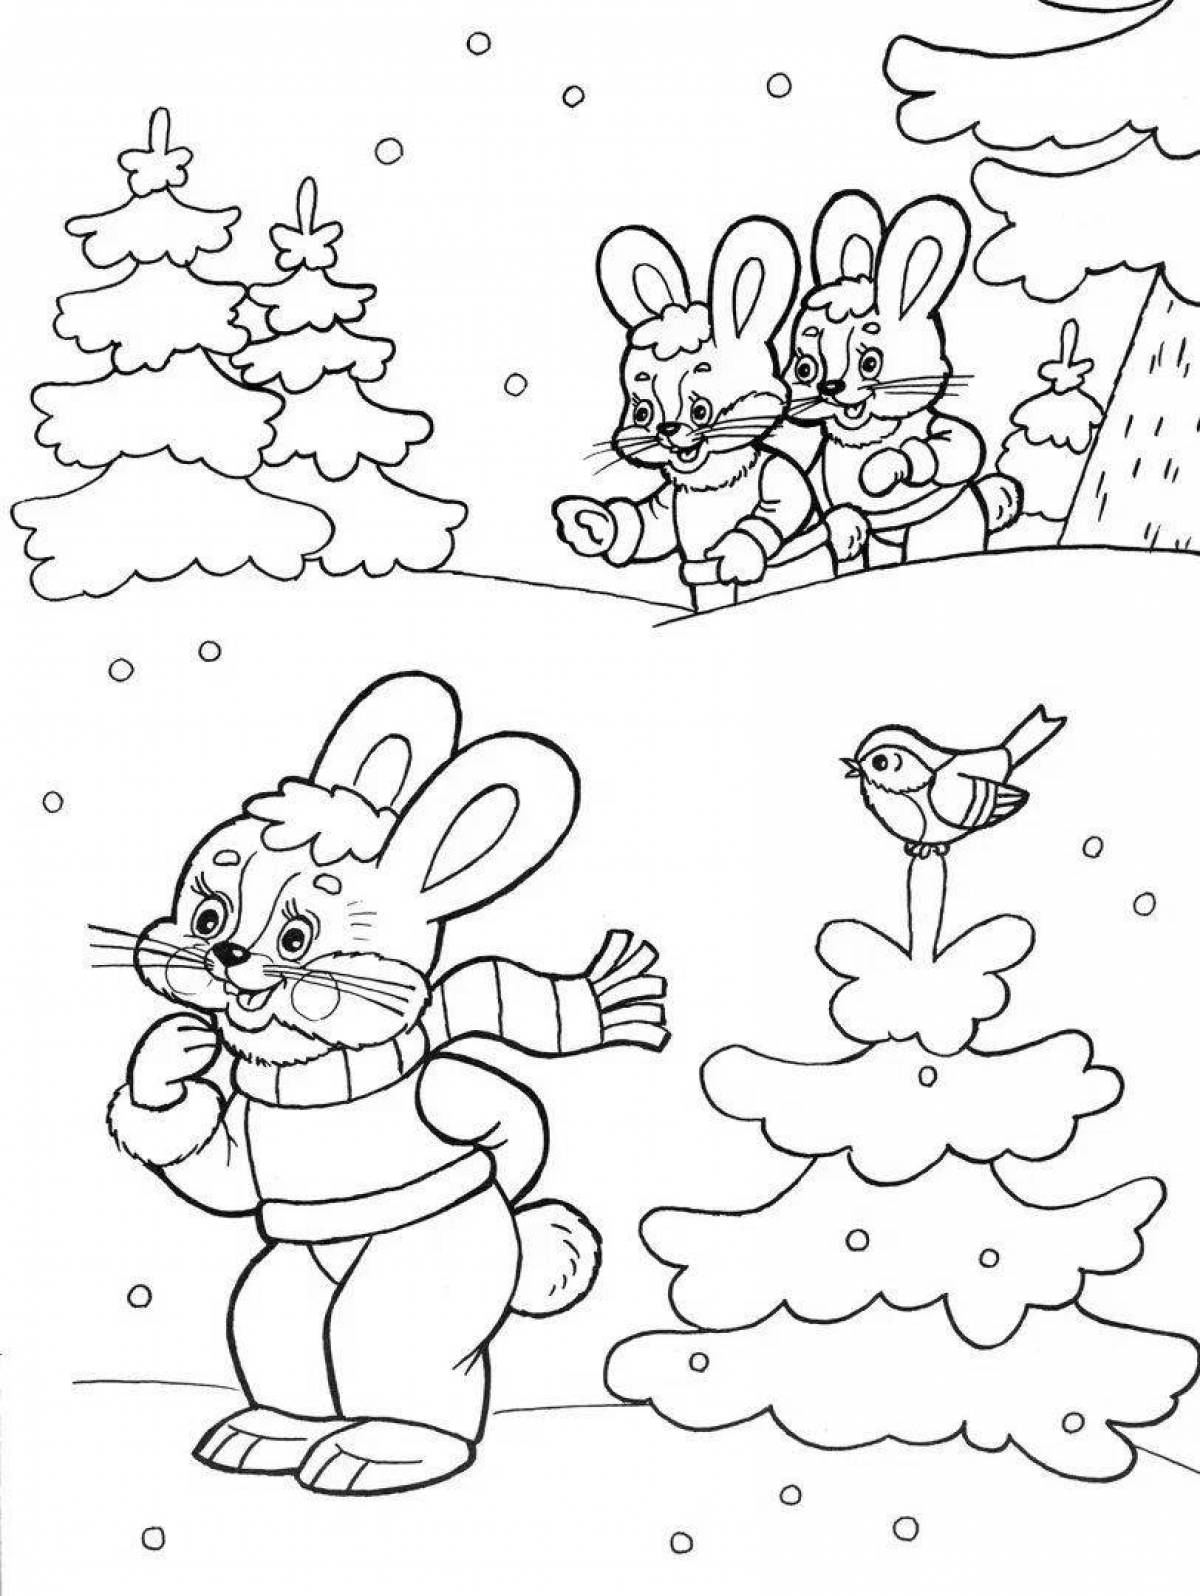 Luxurious bunny Christmas coloring